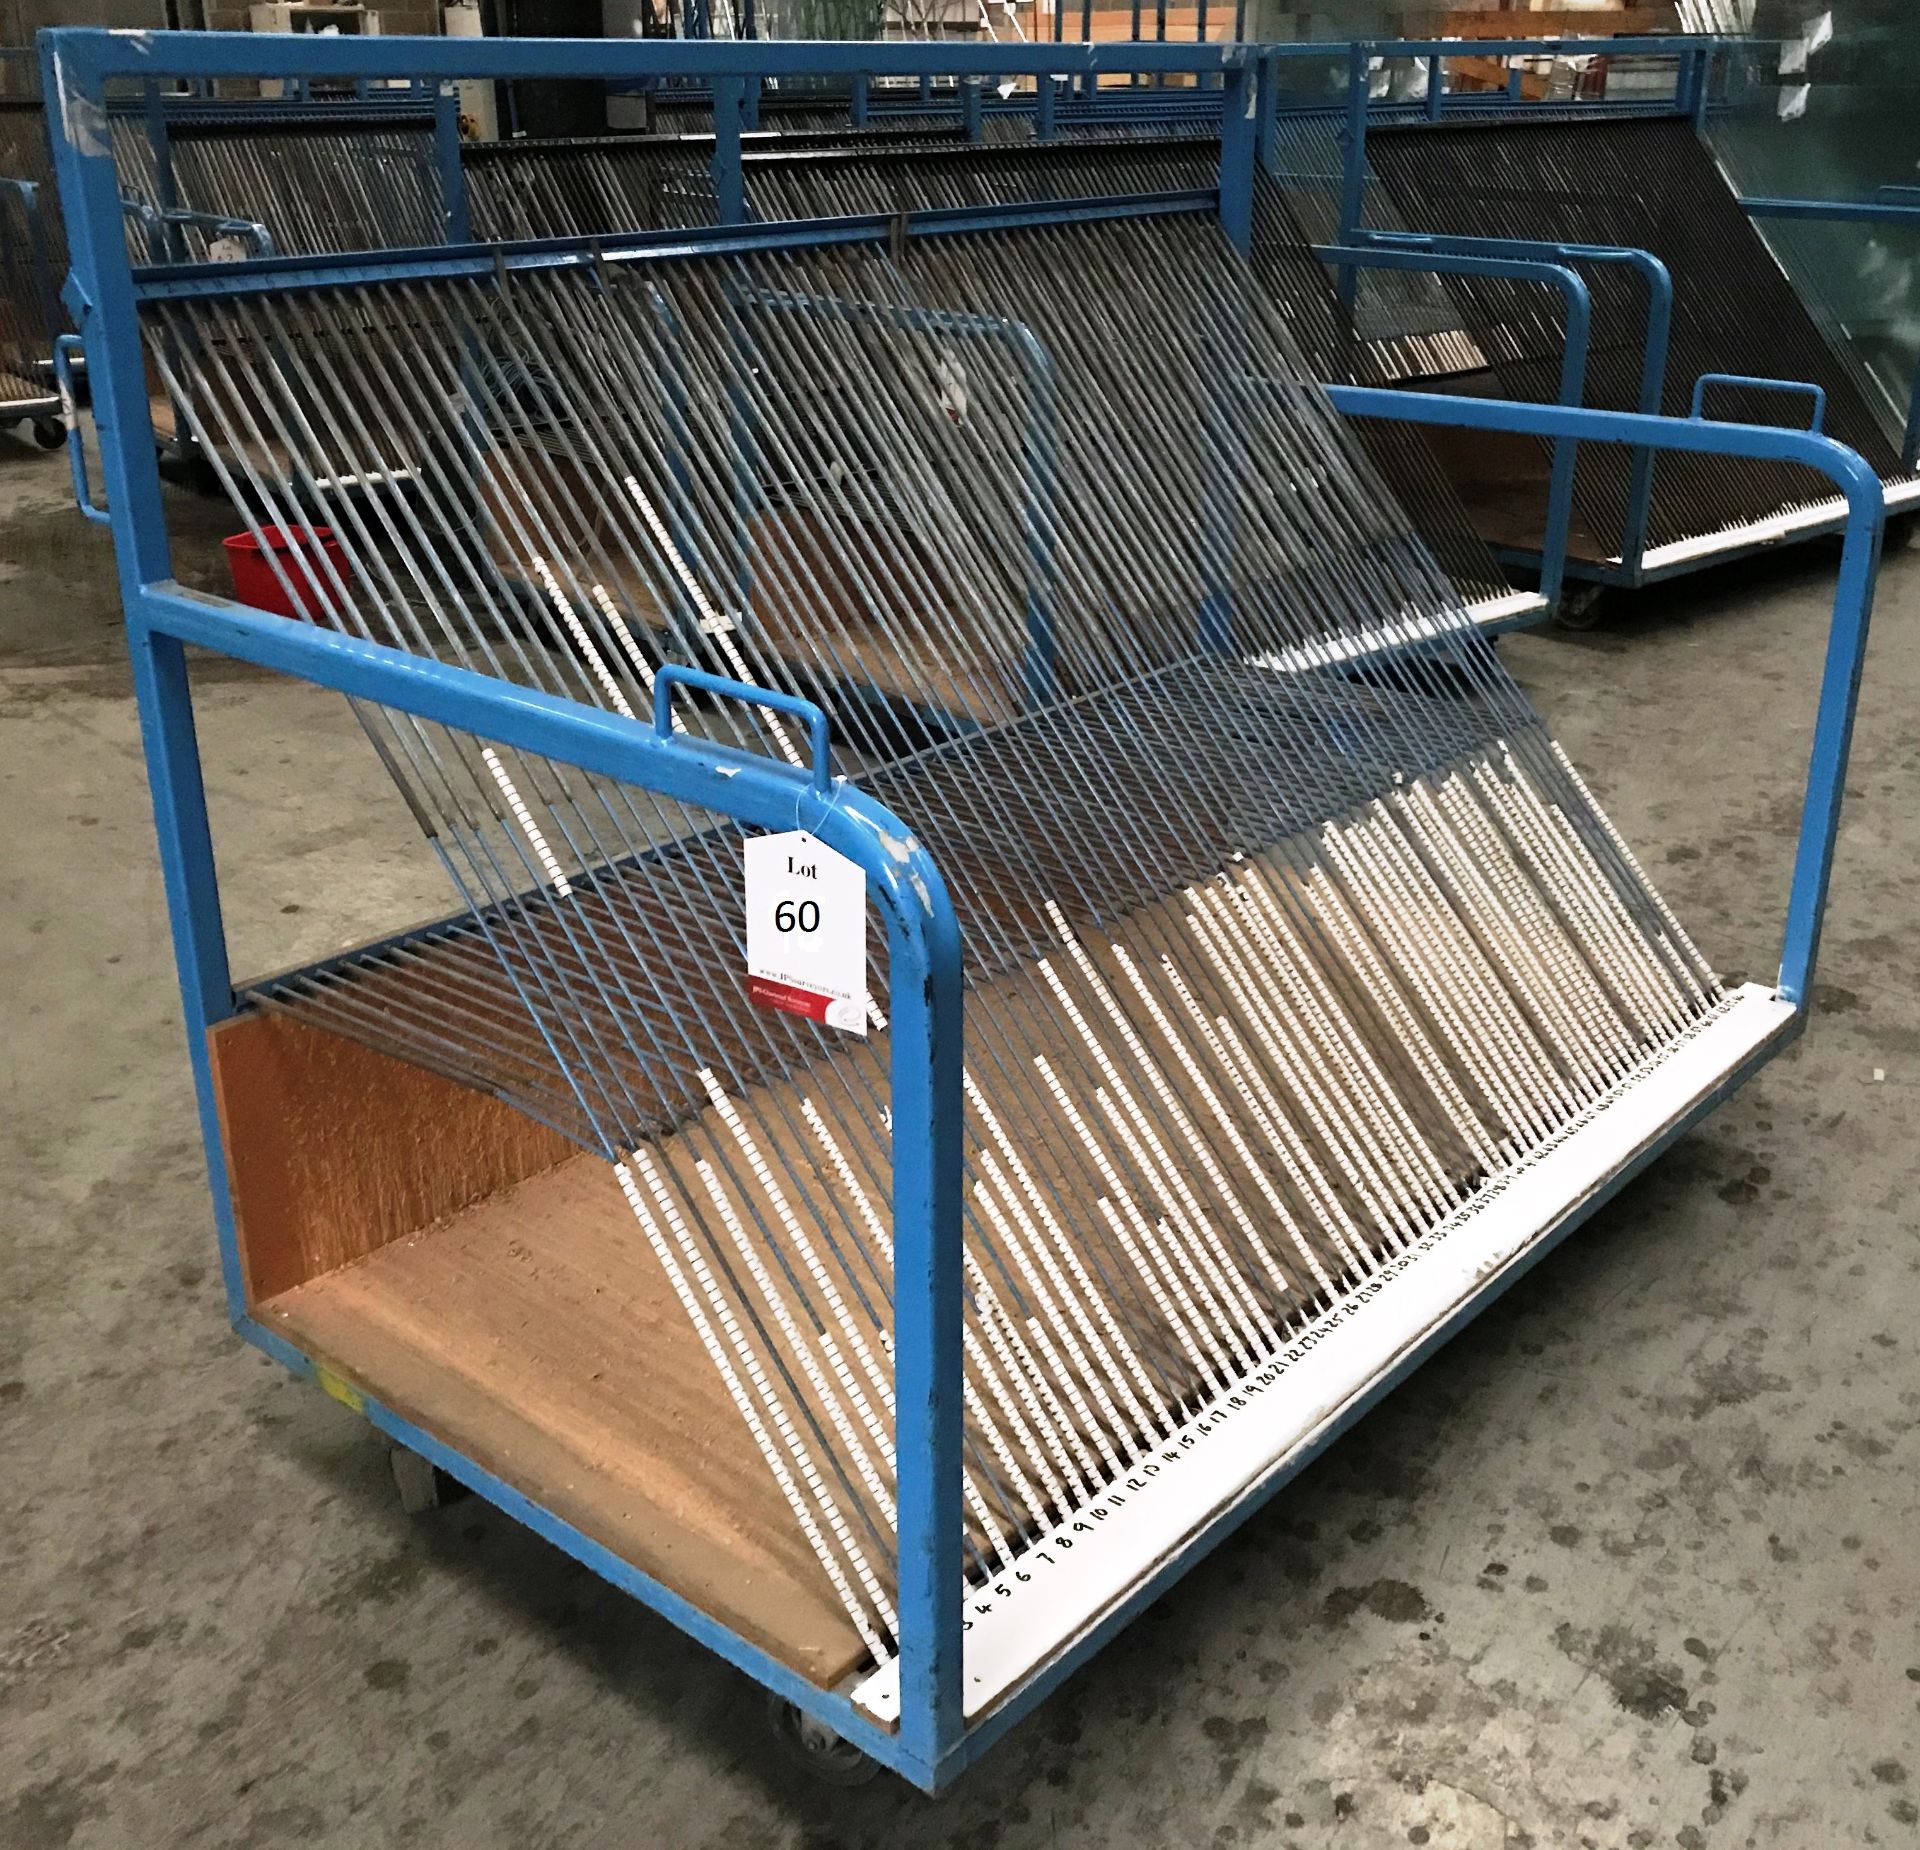 64 Slot Mobile Glass Trolley w/ Vertical Mounted Handles